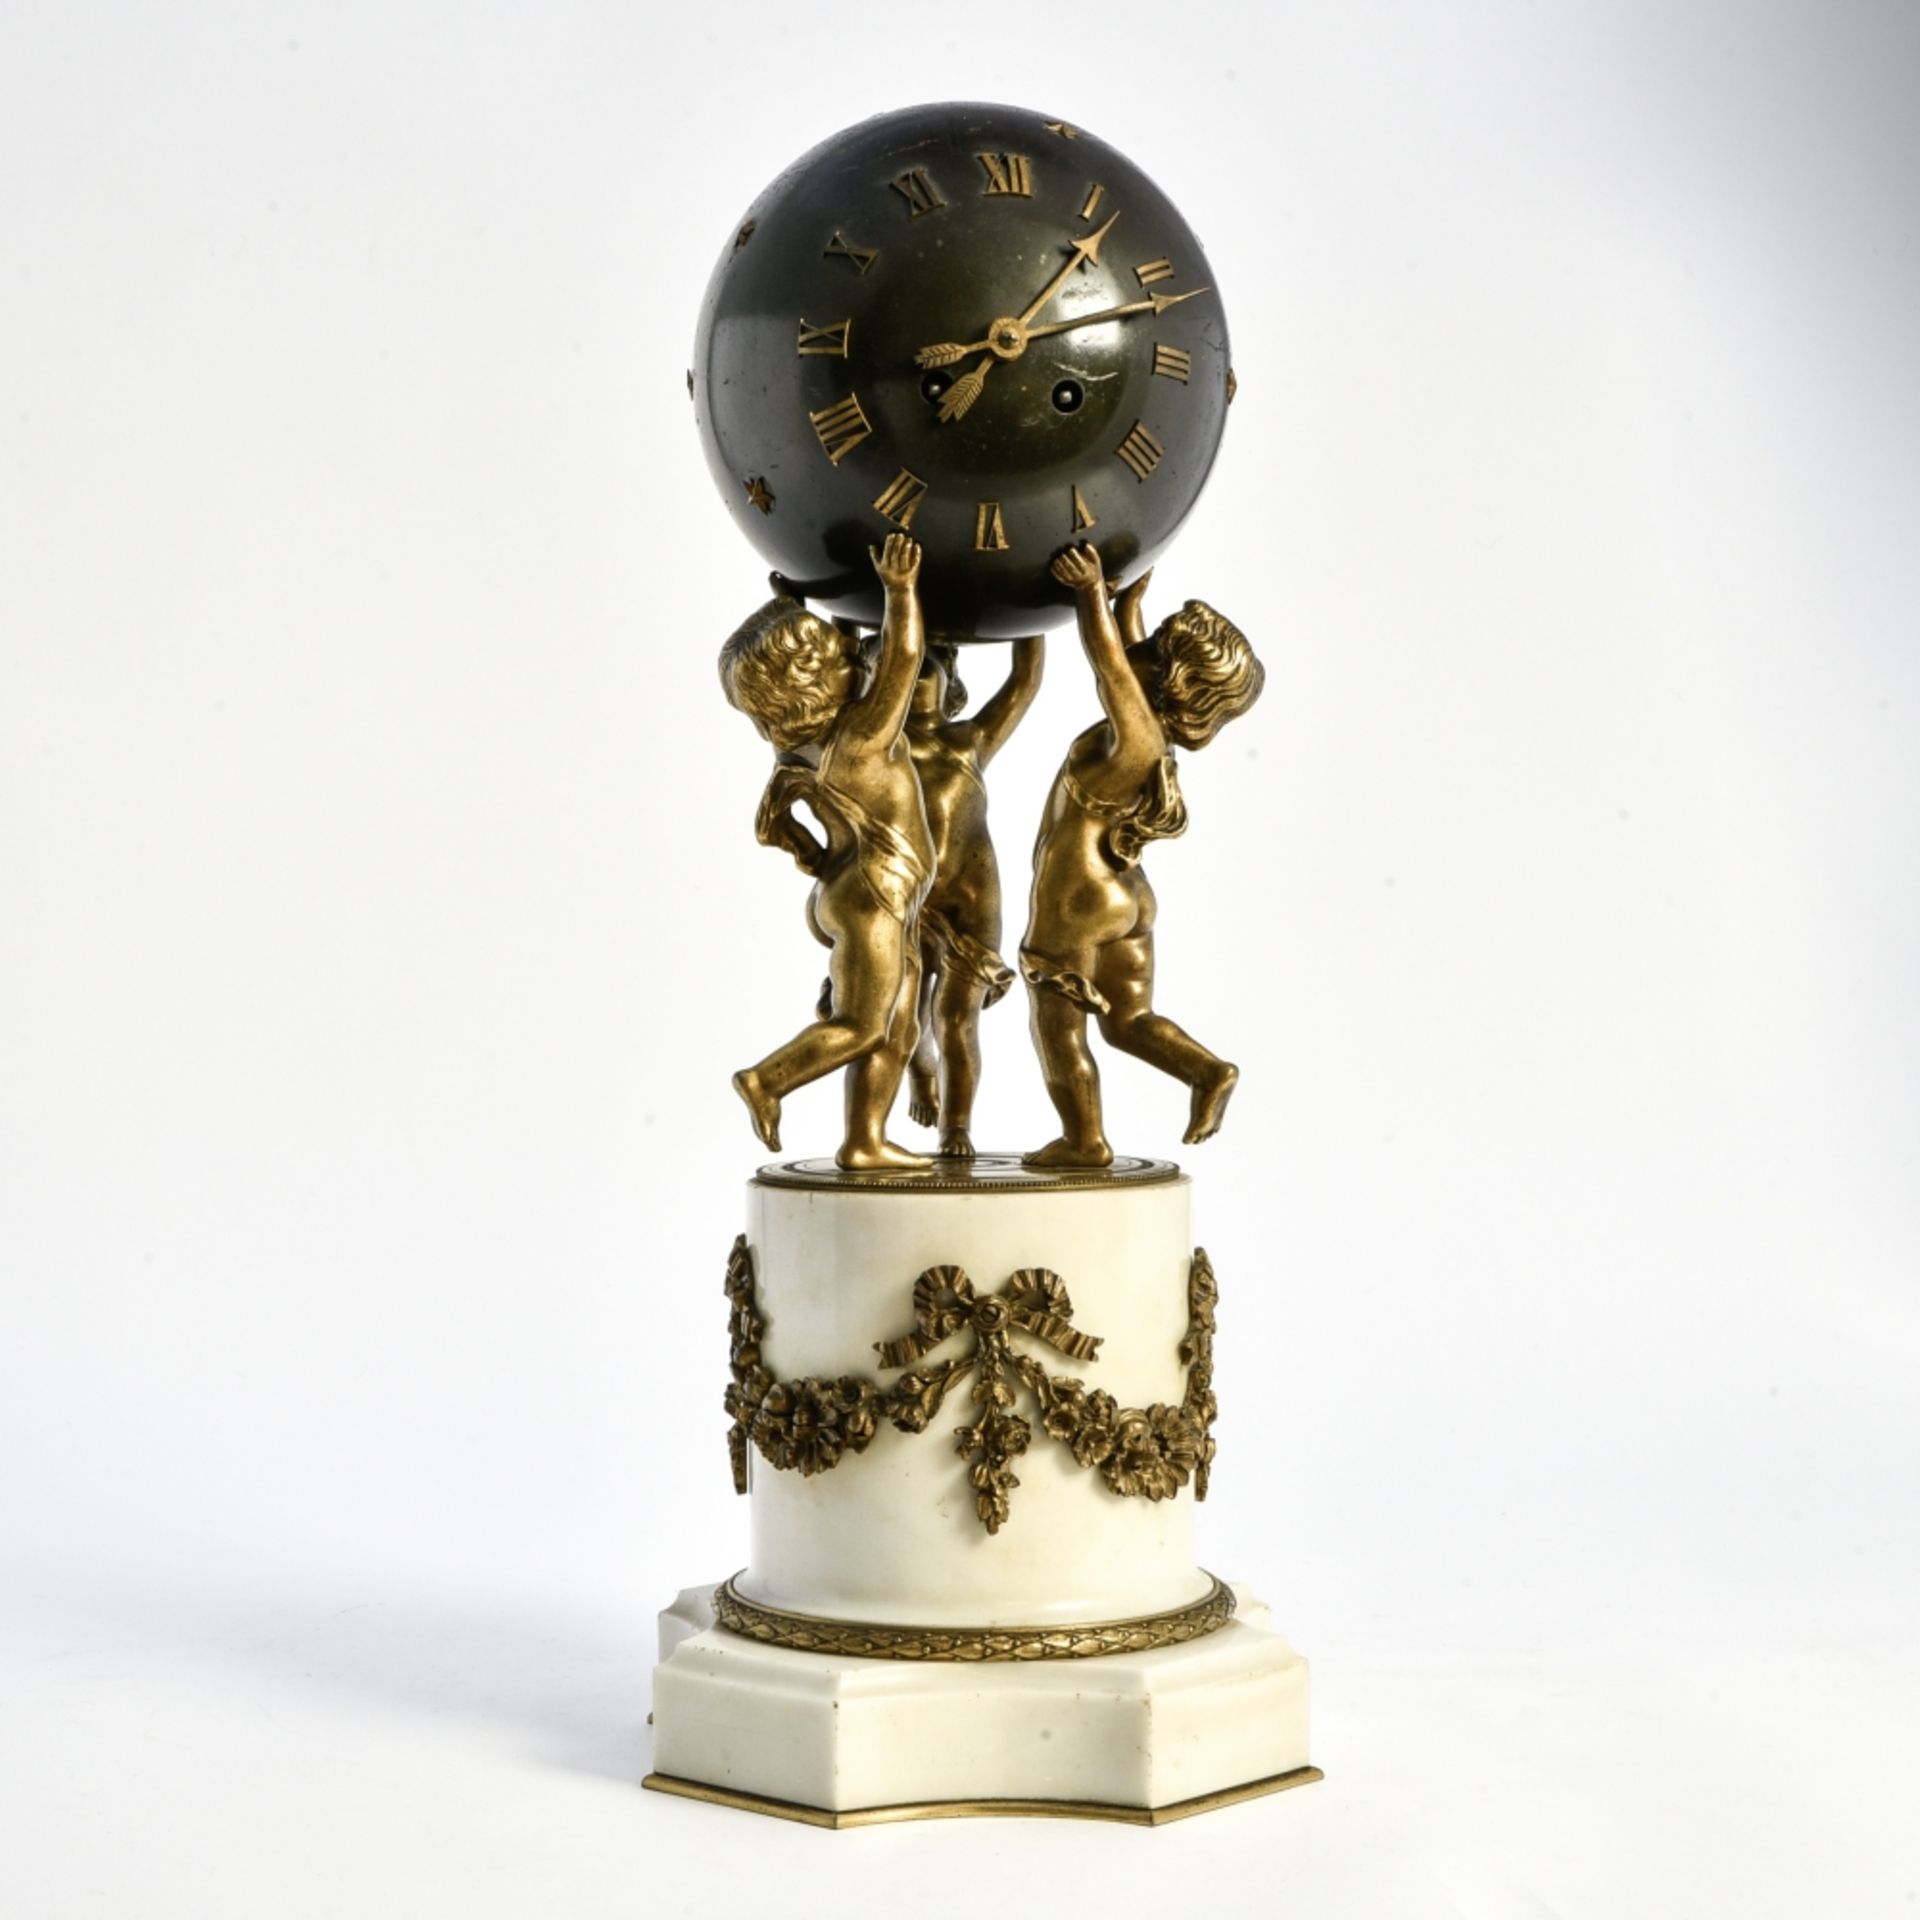 Clock 19TH CENTURY FRENCH WORK bronze and marble, decorated with putti under a starry globe one